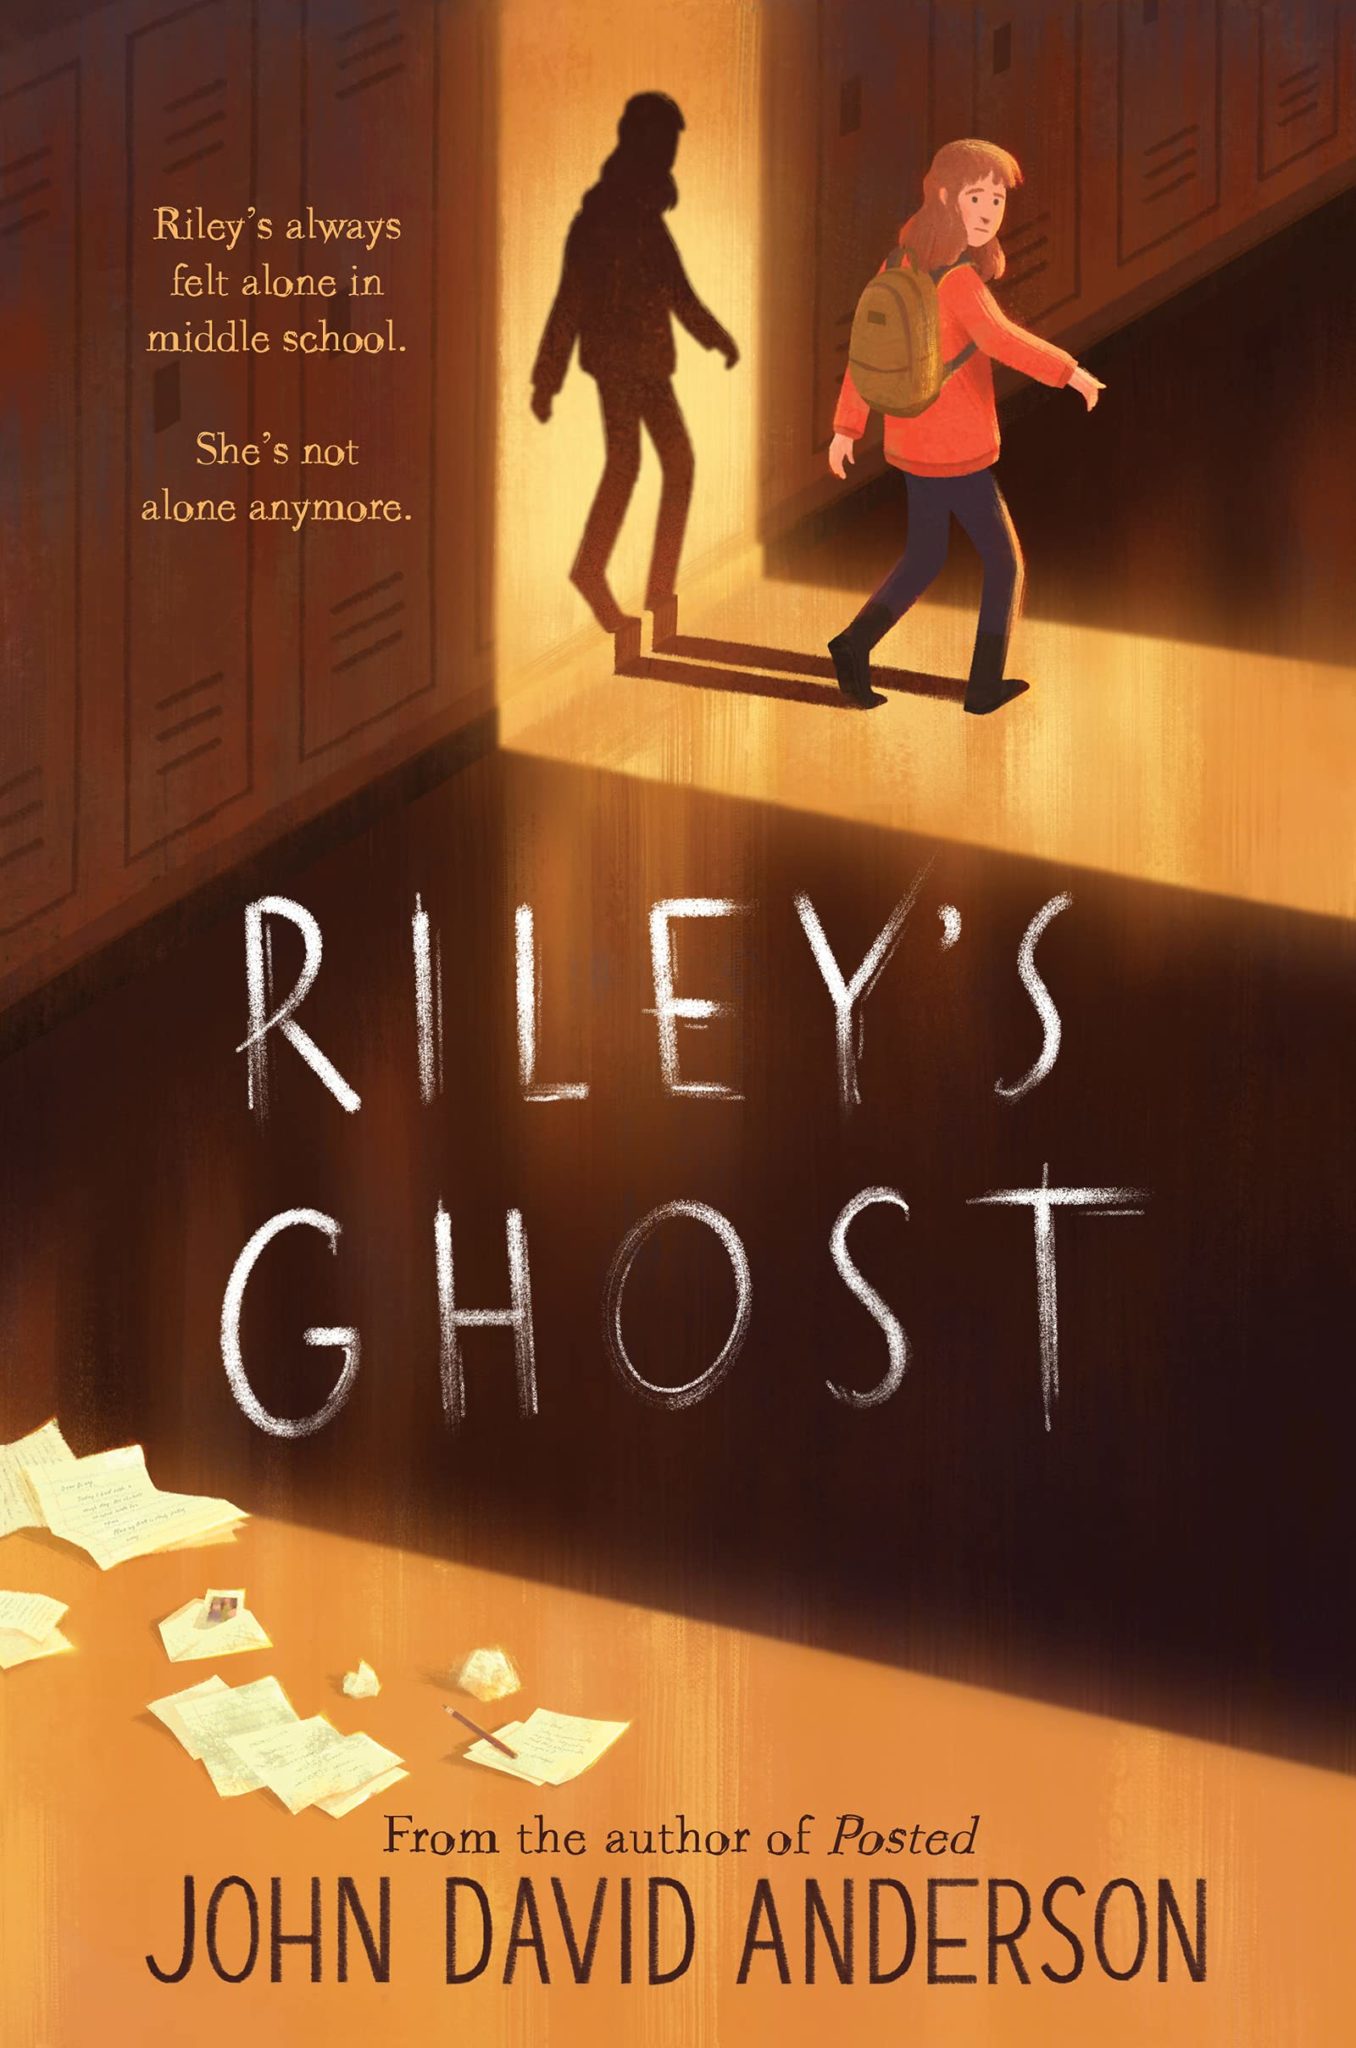 "Riley's Ghost" book cover by John David Anderson